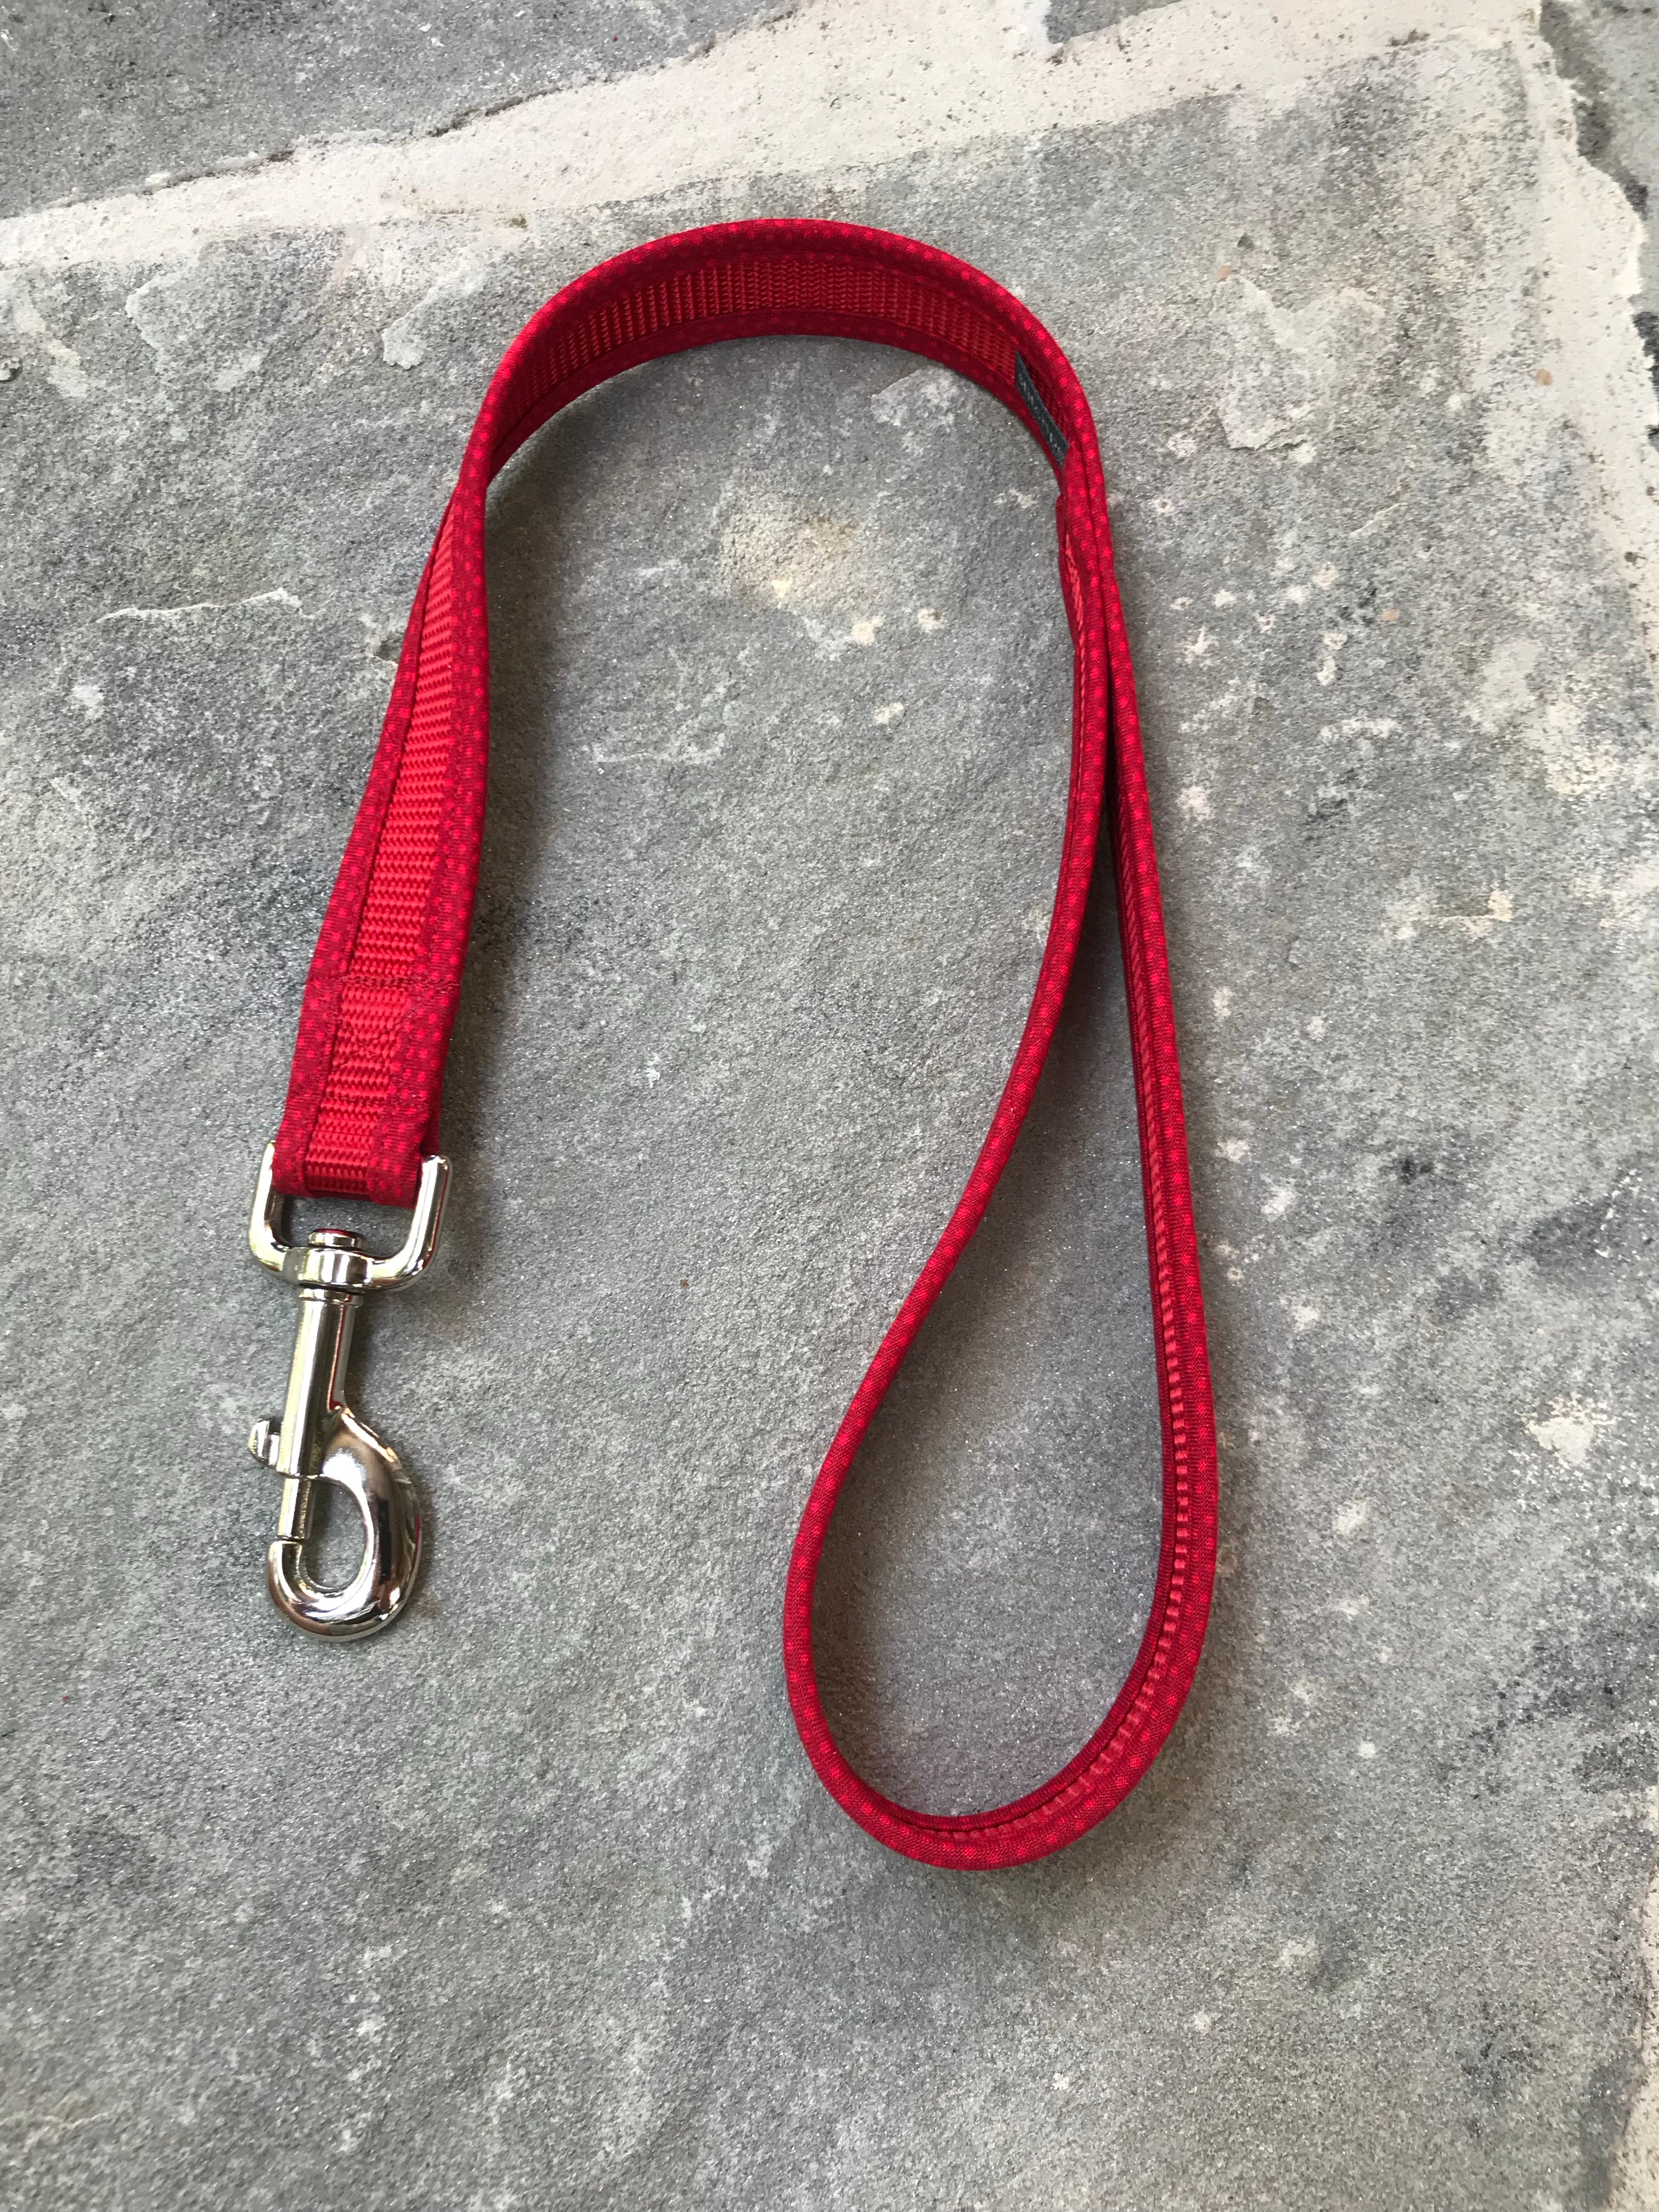 1" Short Lead for Dogs | Red on Red